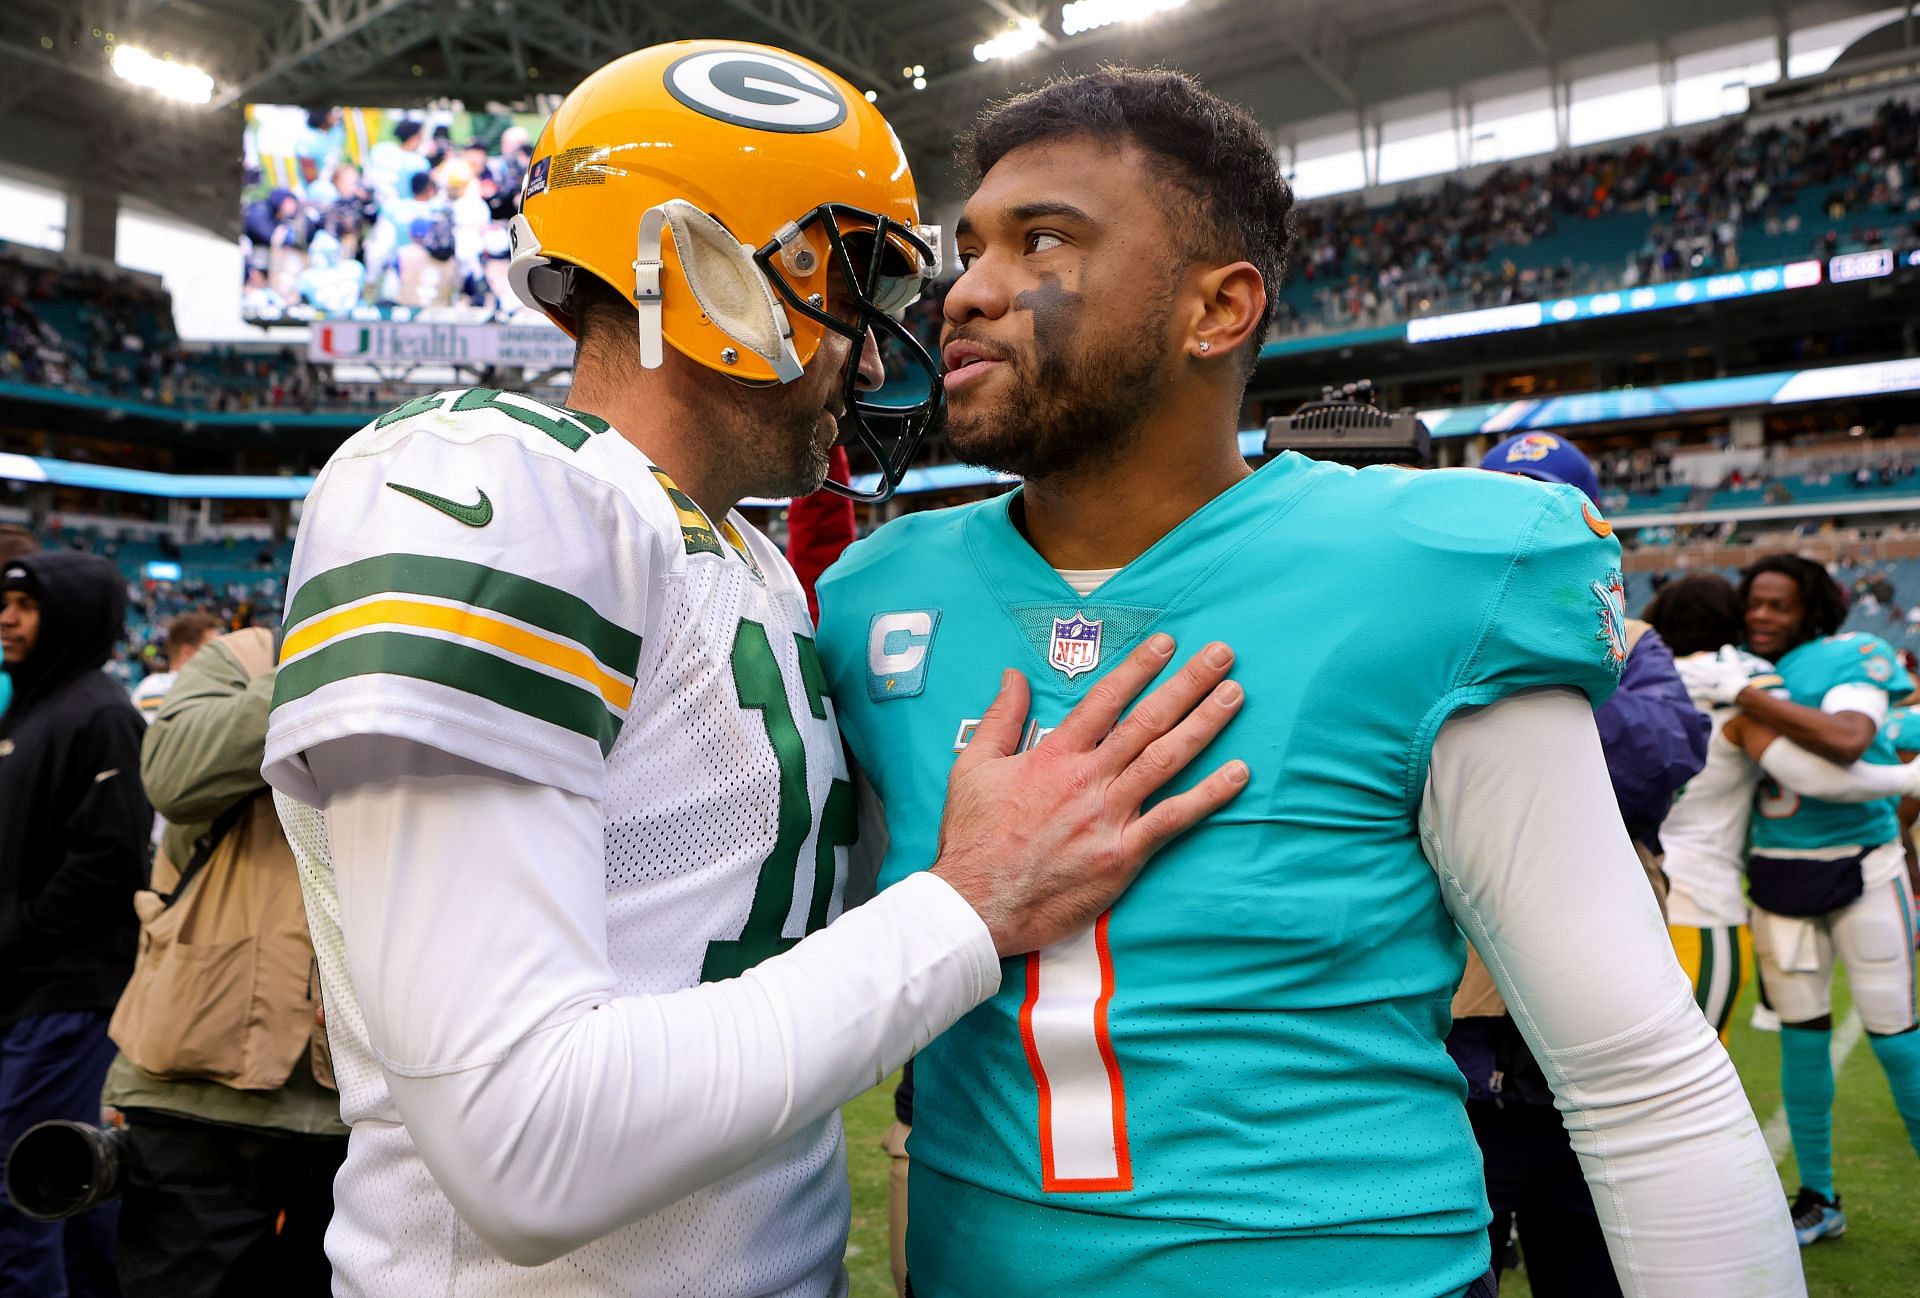 Who is the Dolphins’ starting QB vs Jets? Week 18 update on Miami’s QB situation amid Tua Tagovailoa uncertainty